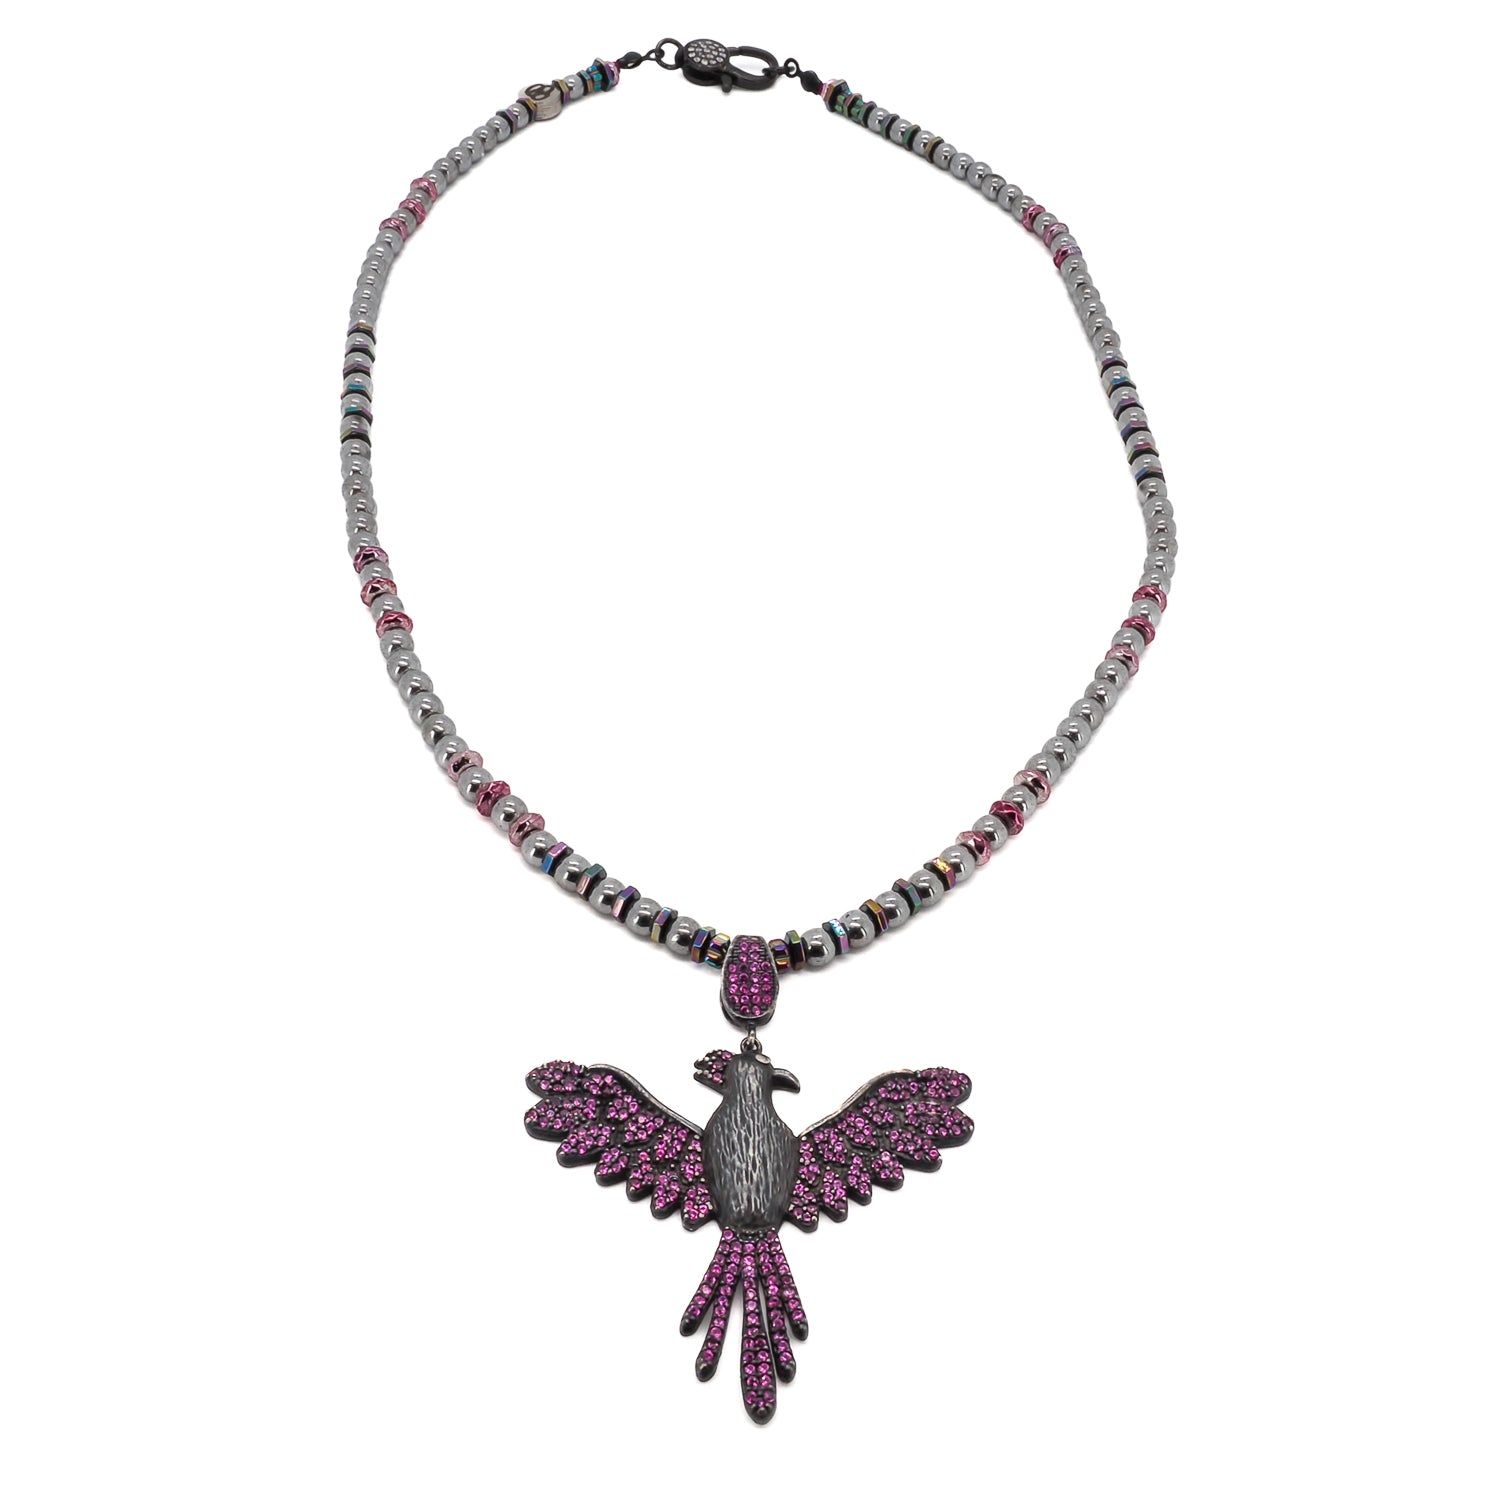 A special necklace with a Phoenix pendant and pink Swarovski crystals, symbolizing rebirth and youth.